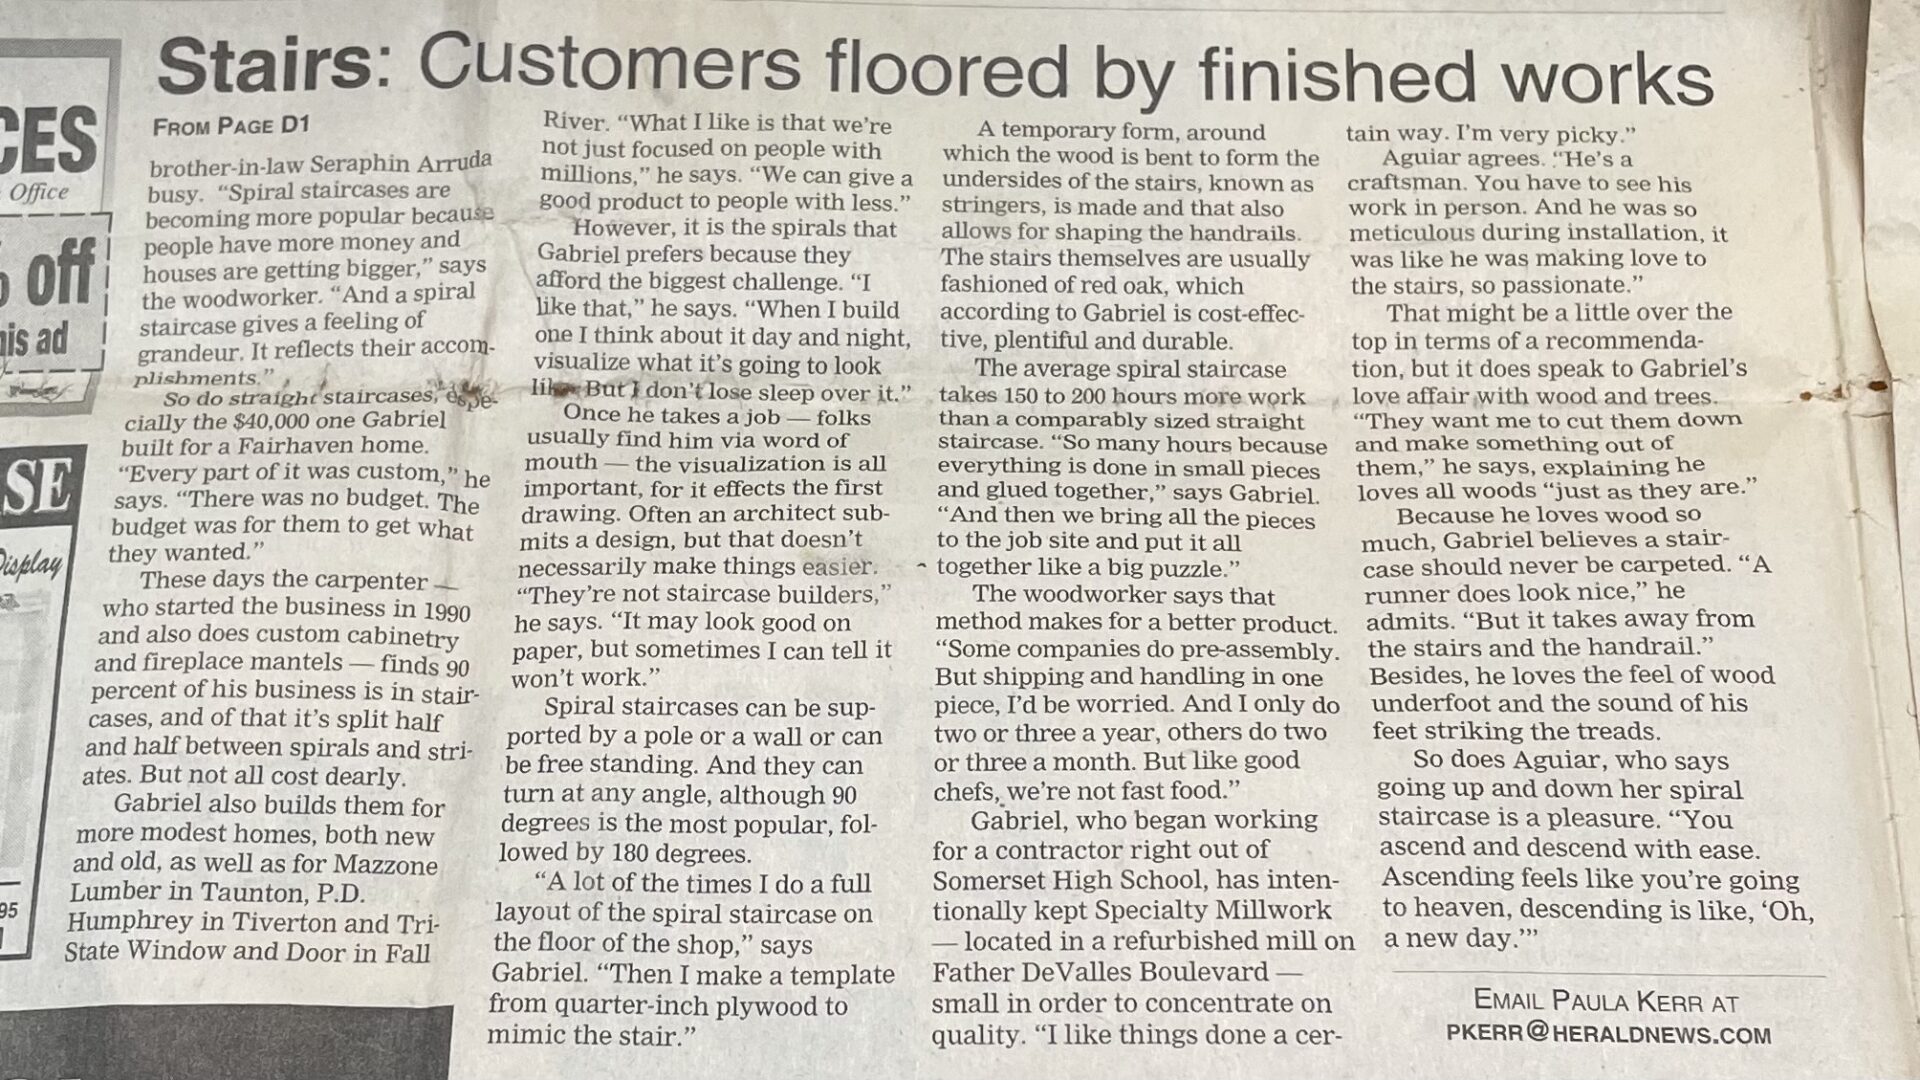 A Newspaper Article on Customers Floored by Finished Works